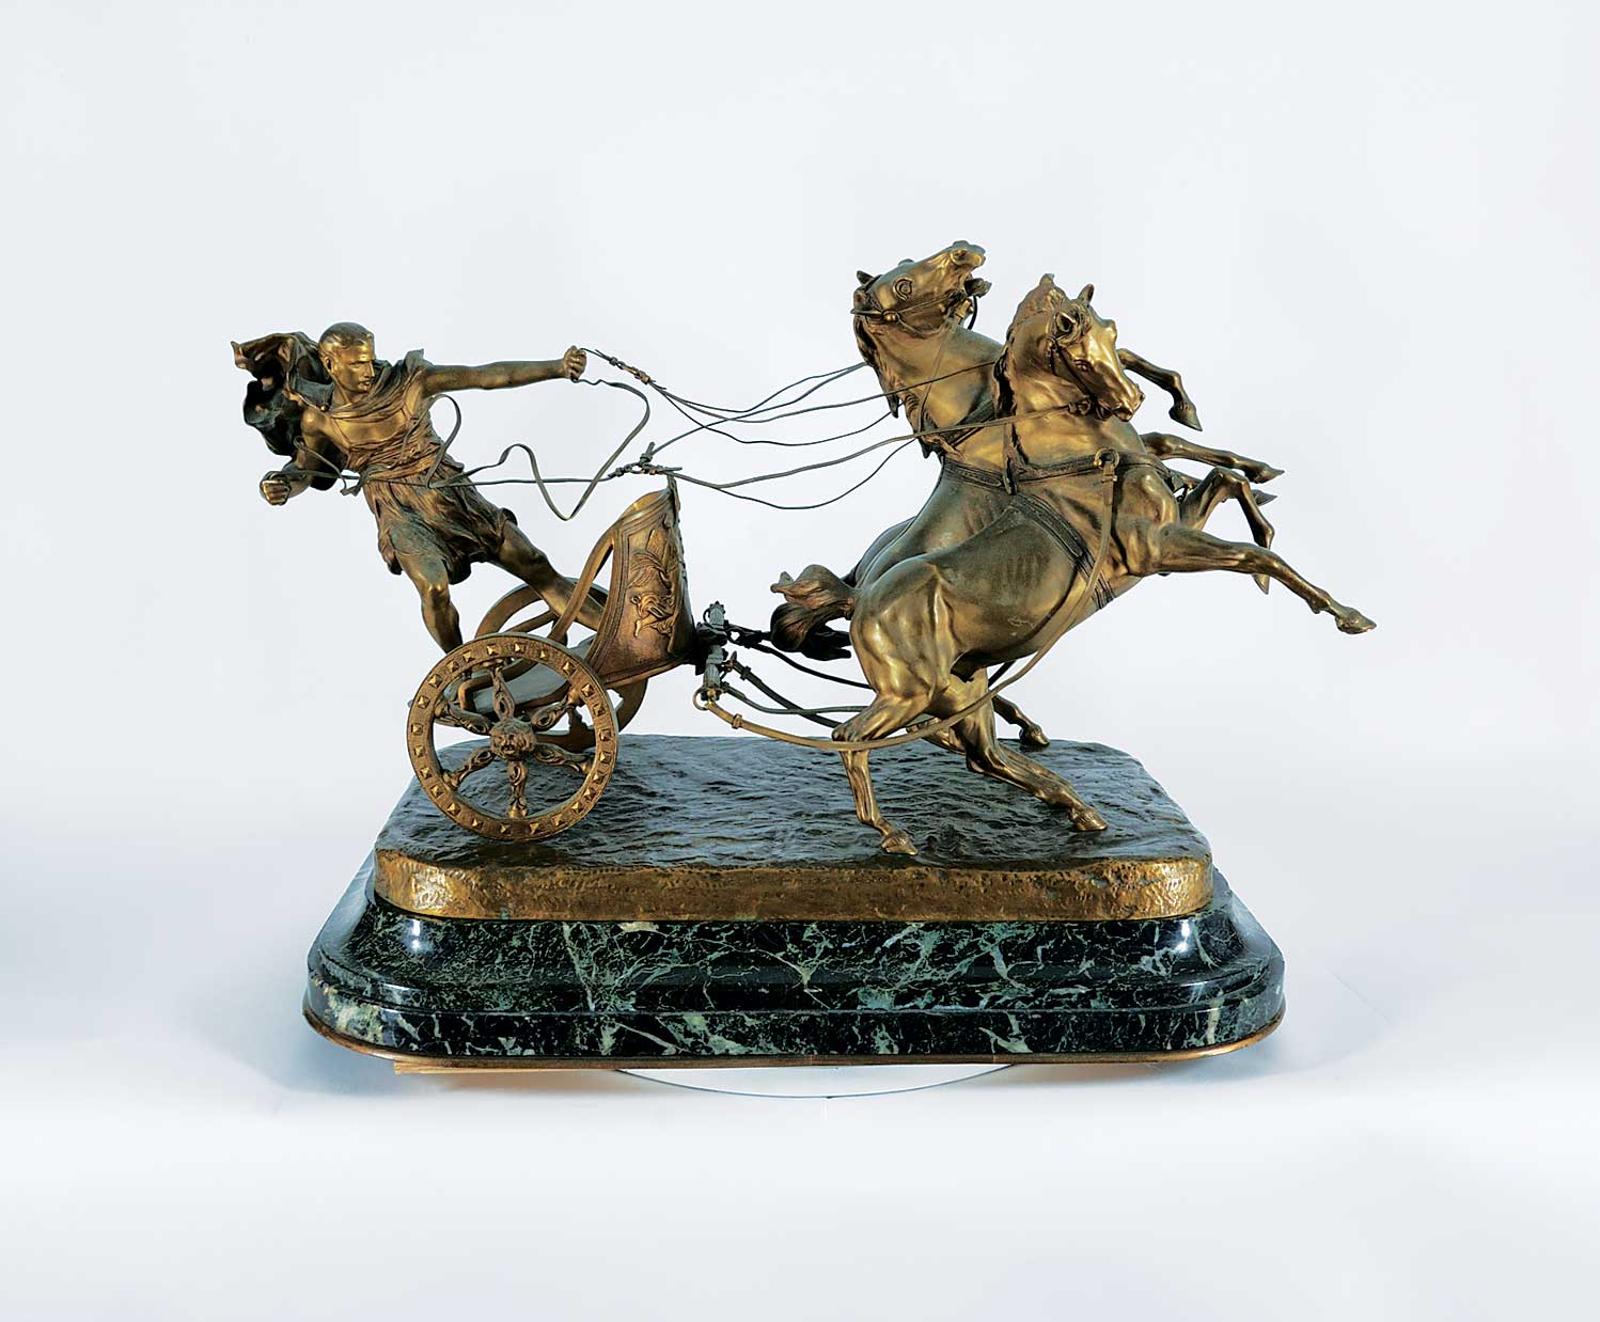 Untitled - Roman Charioteer by artist Angiolo Vannetti